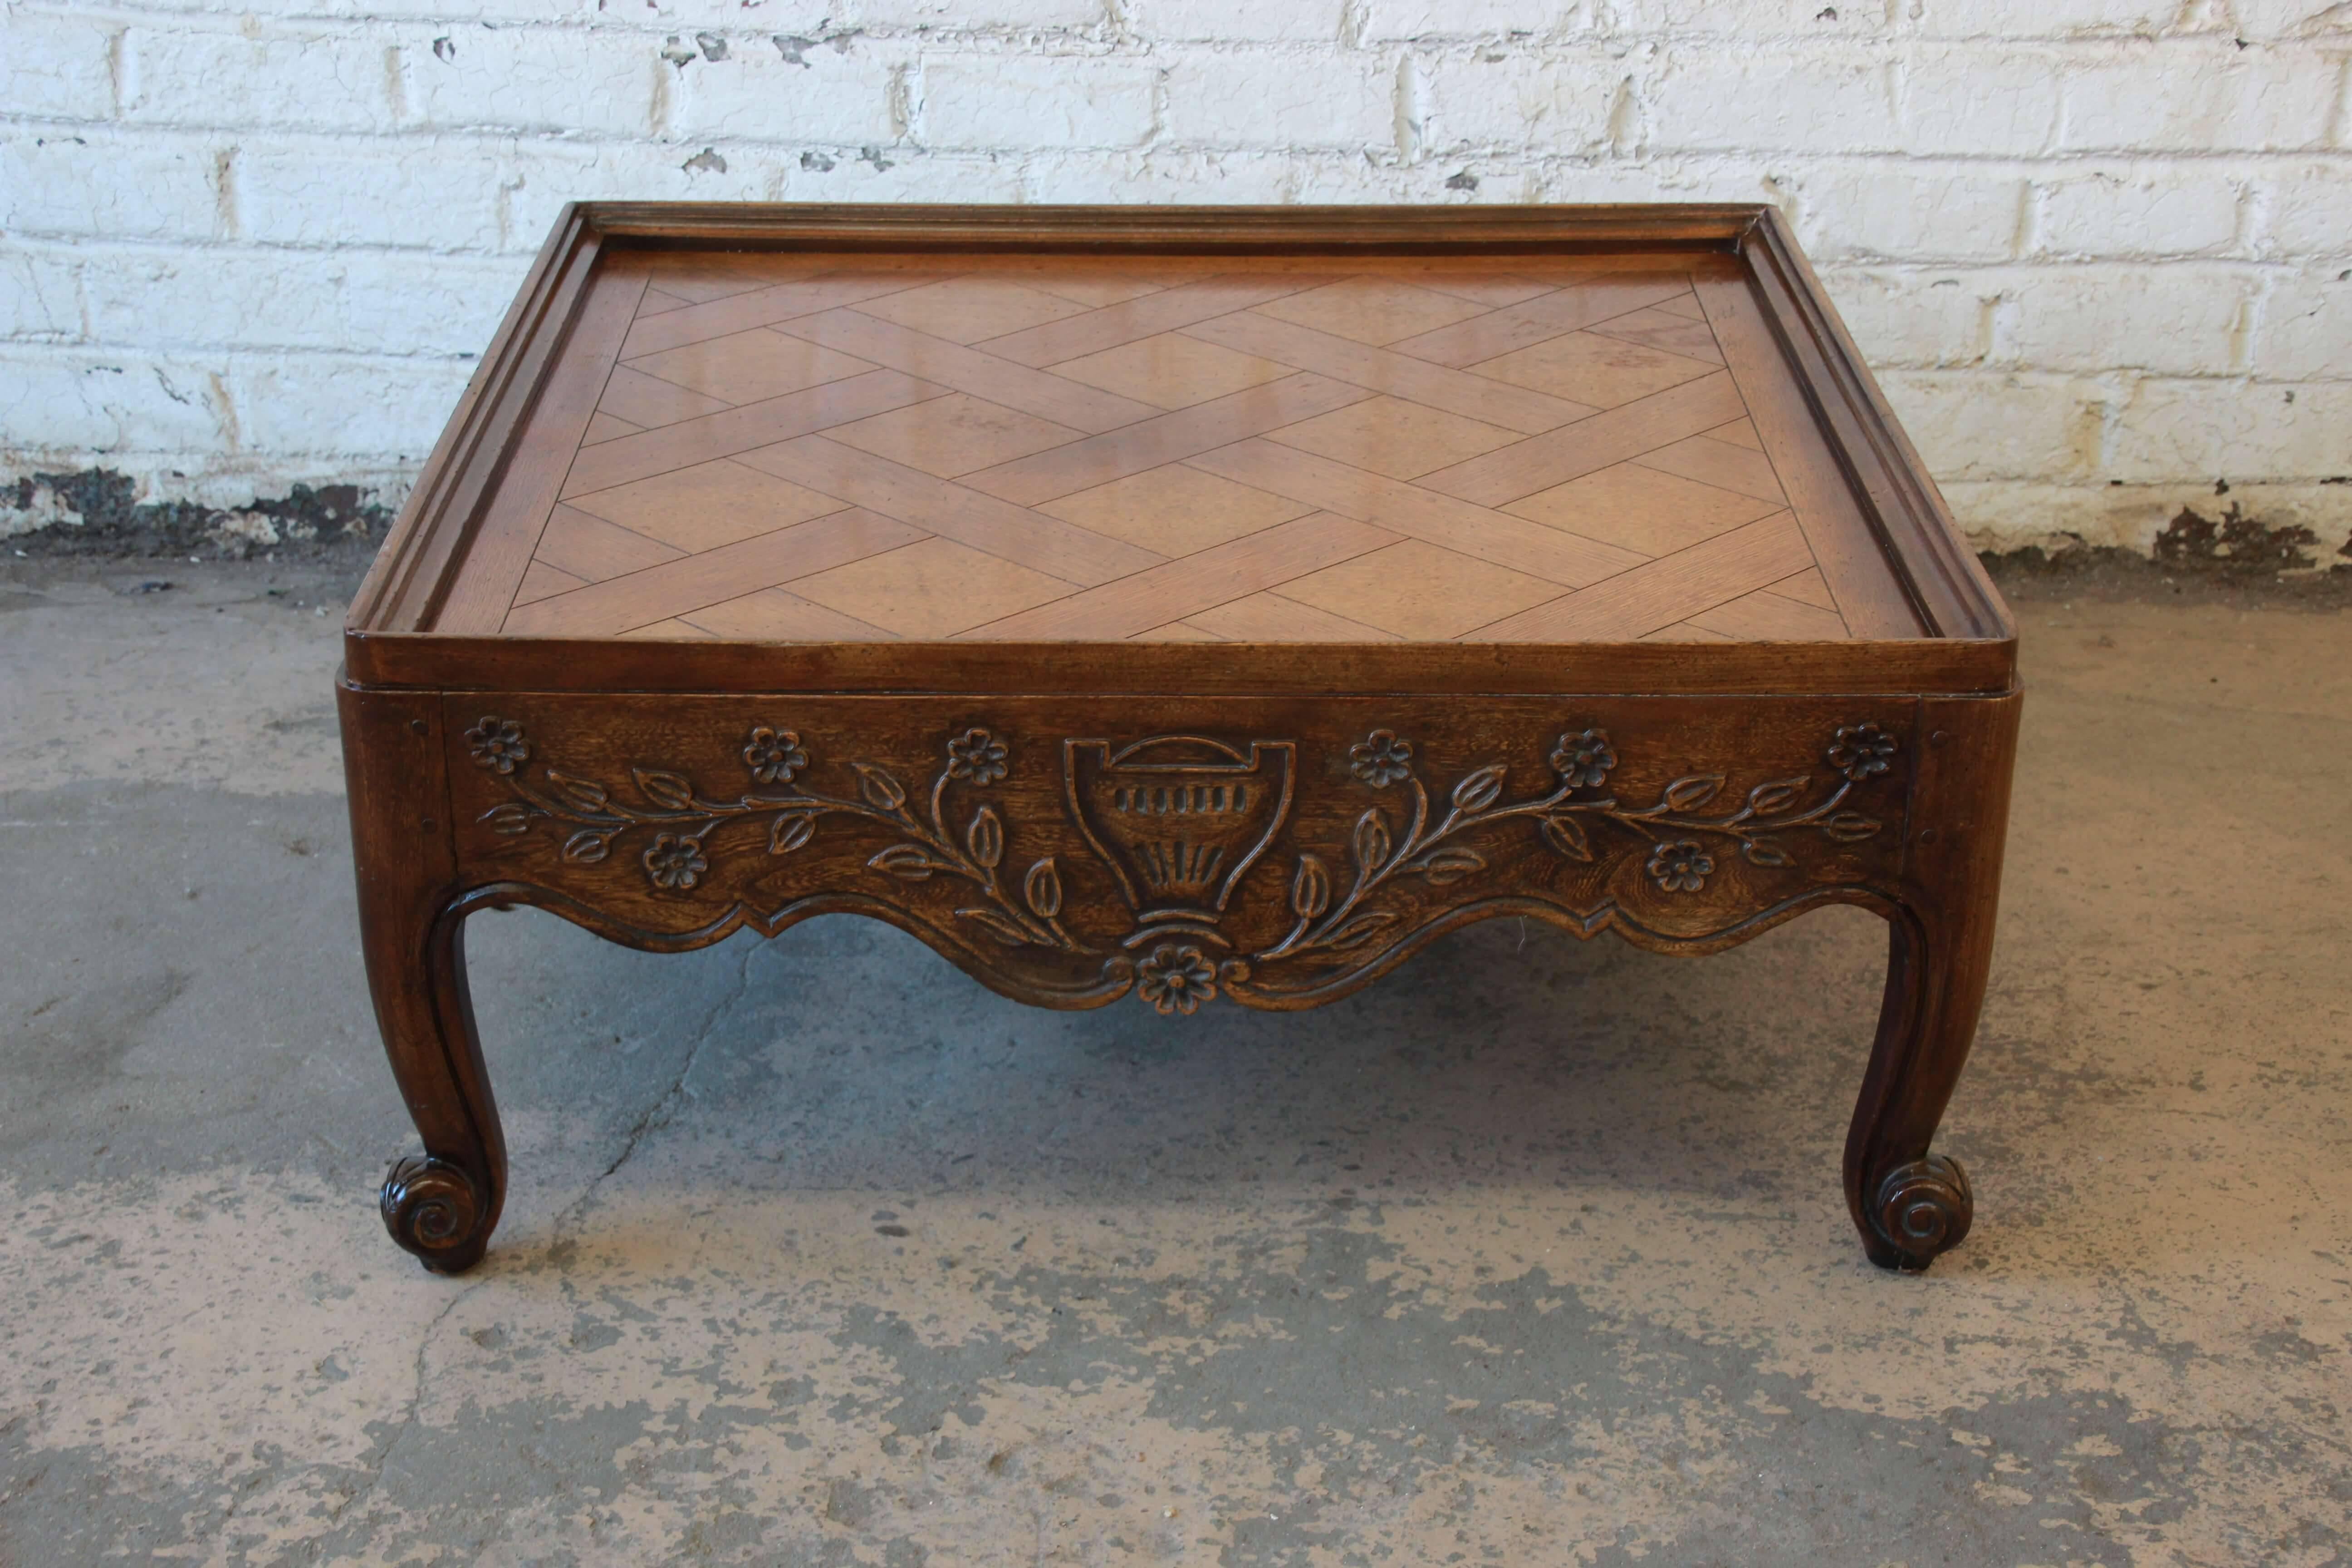 Offering a very nice carved French Country square coffee table by Baker Furniture. The coffee table has beautiful floral carved details with classic Provincial legs. It features a nice parquetry design on top. The table is in good vintage condition